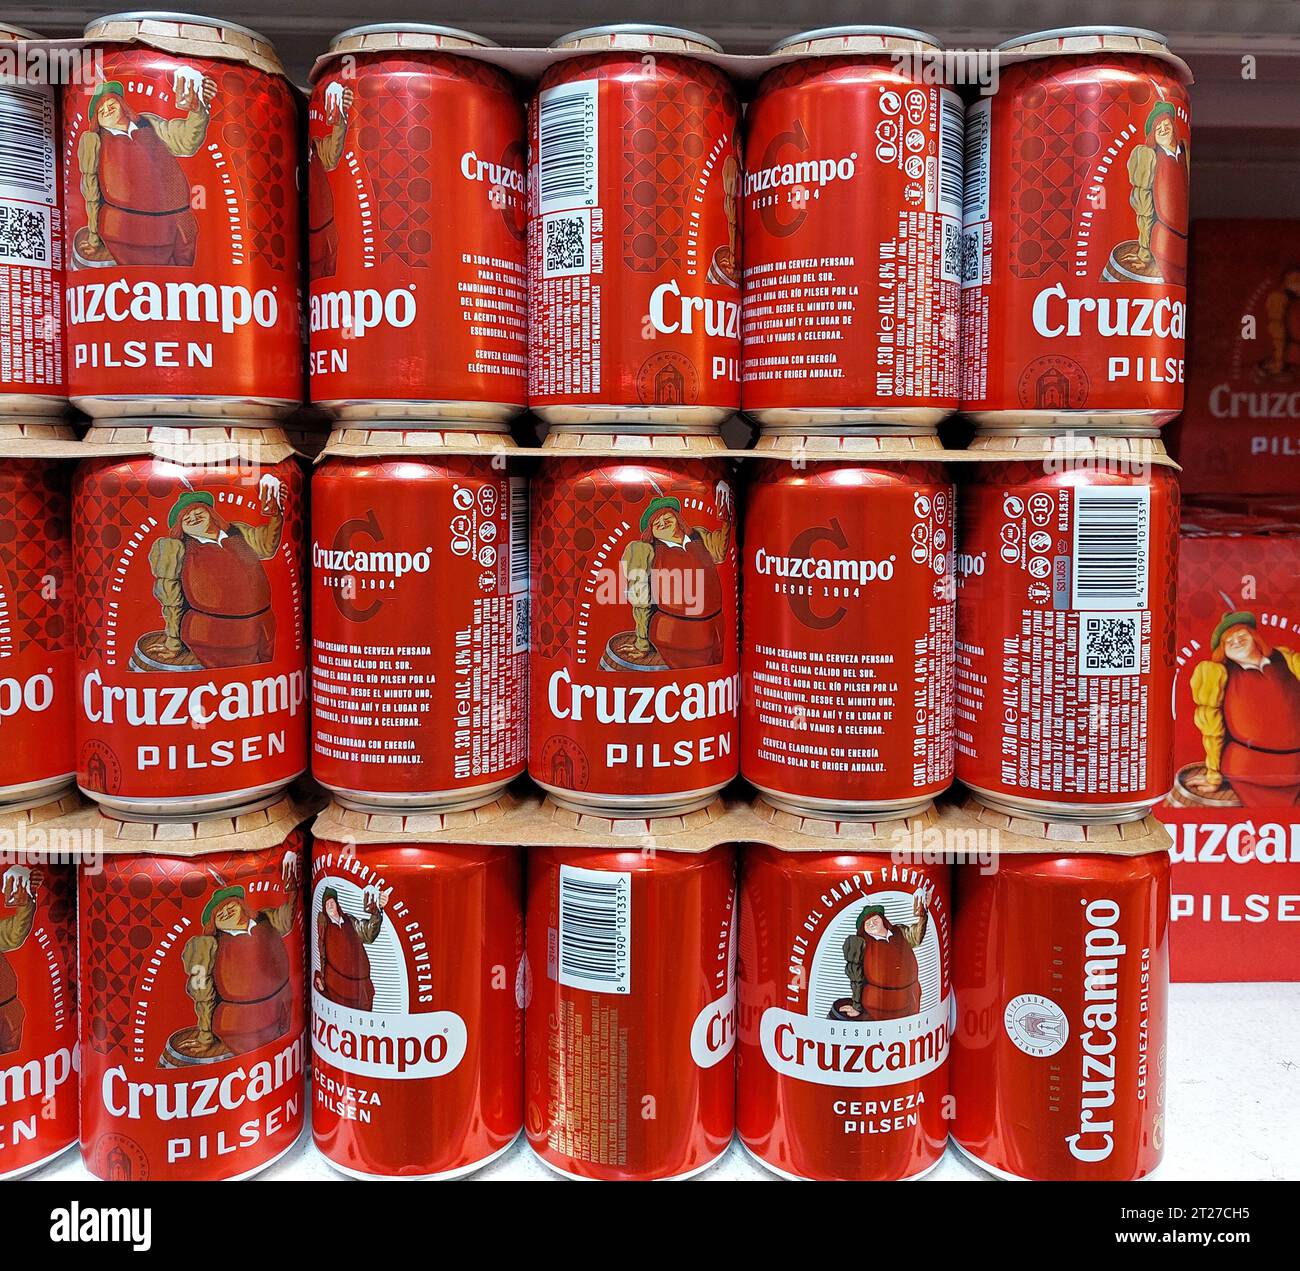 spanish Cruzcampo beer cans in a supermarket Stock Photo